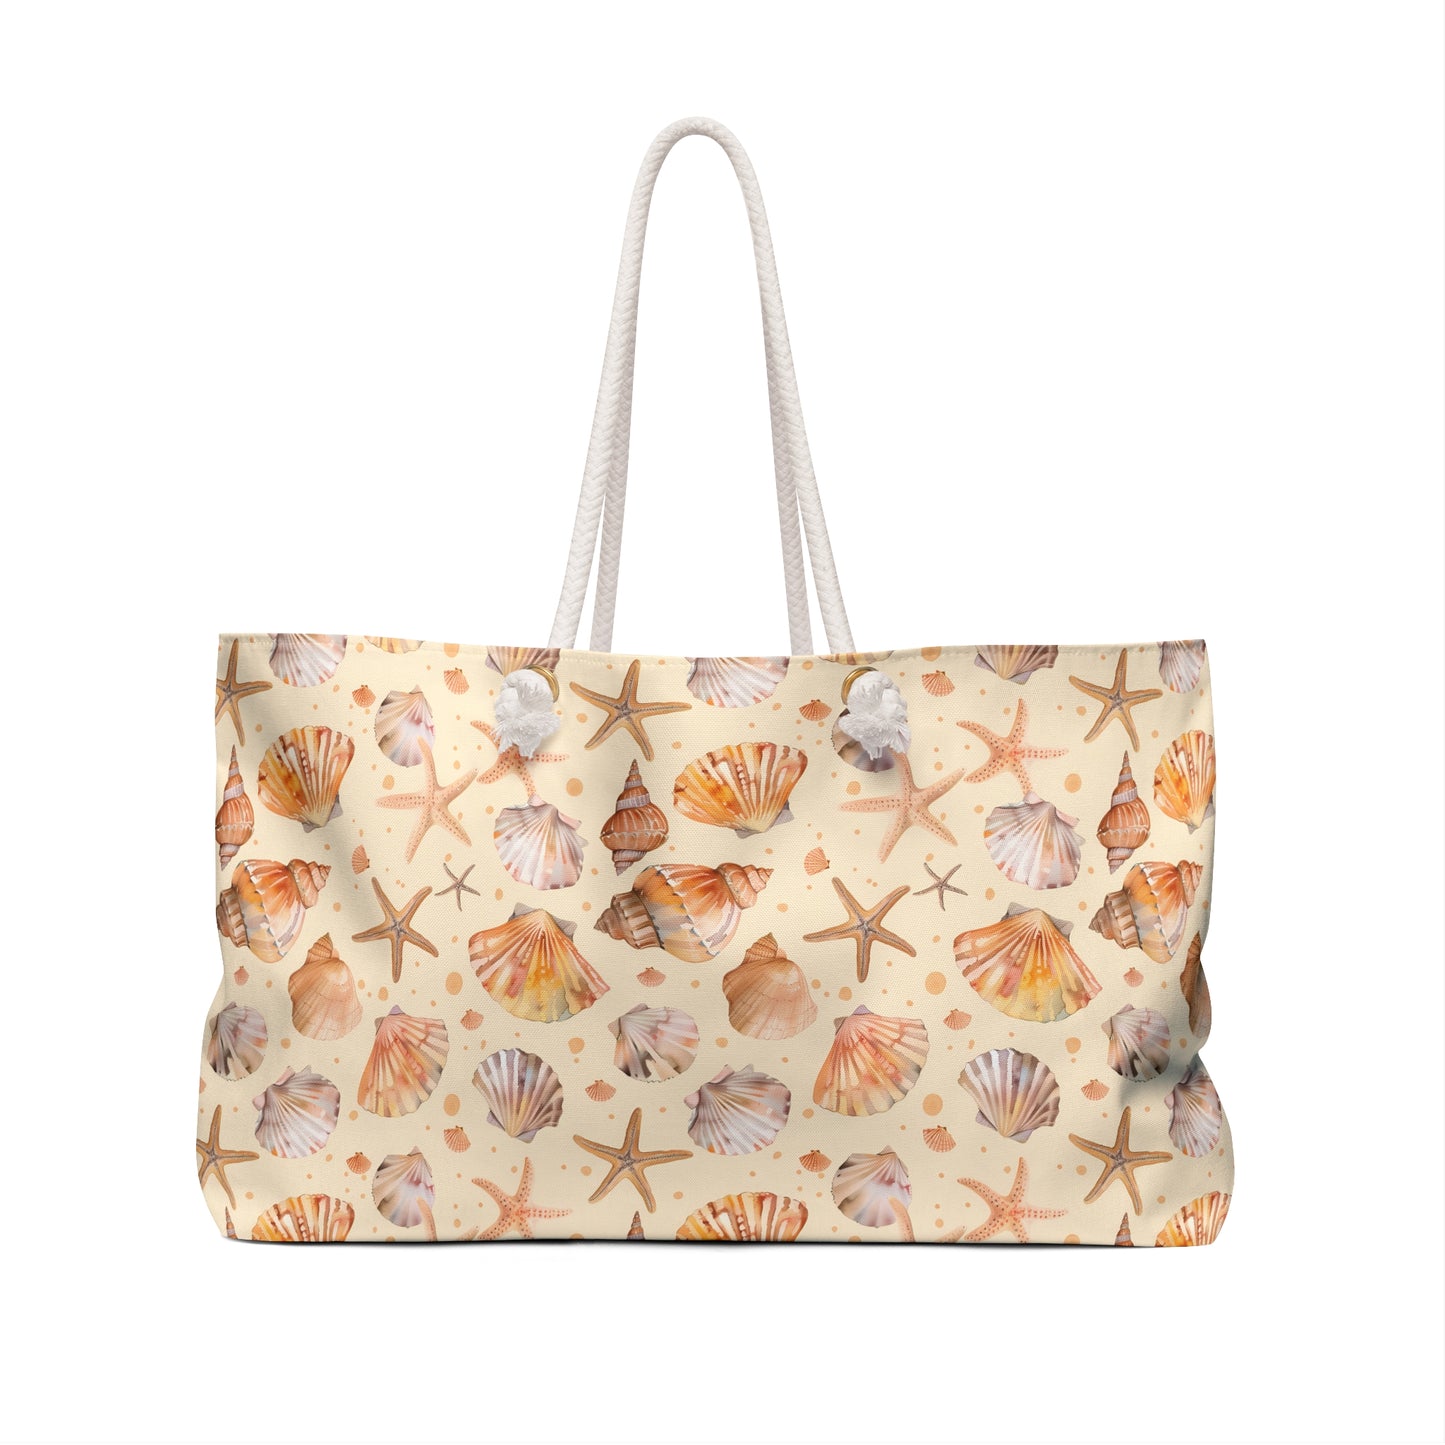 Deluxe Tote & Beach Bag with Seashell and Starfish Watercolor Design (24" × 13" x 5.5")